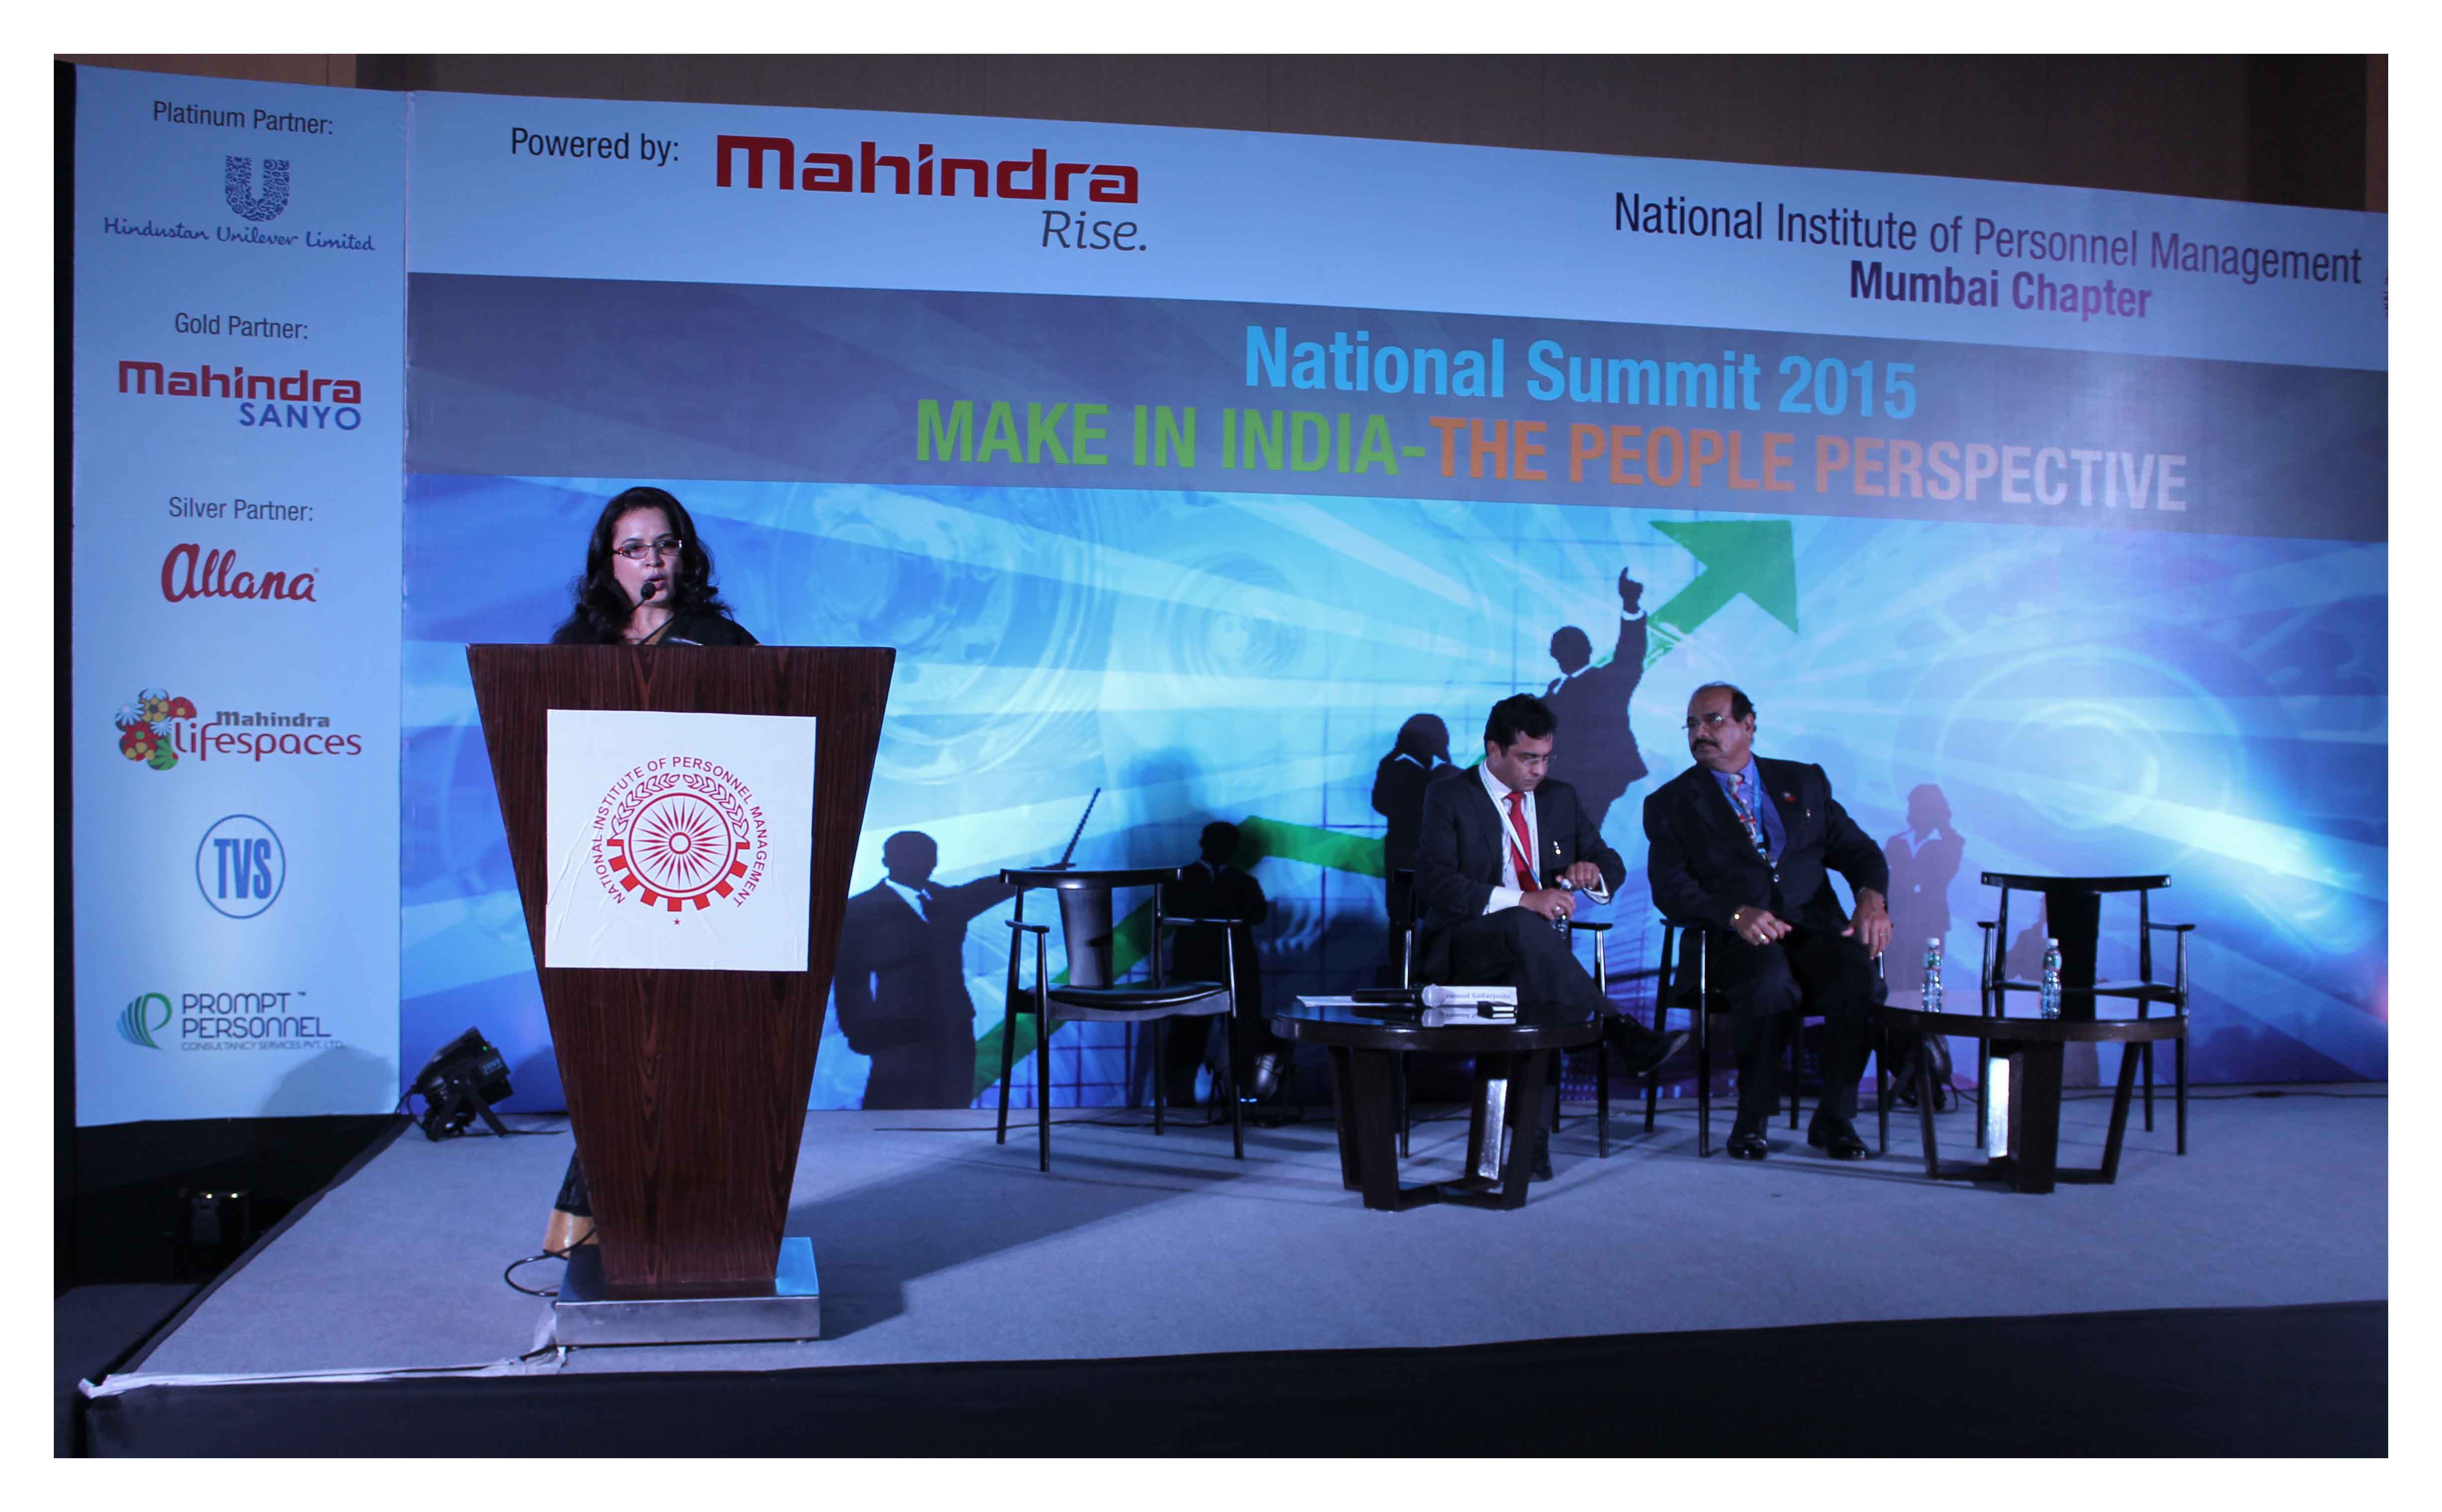 Master of Ceremony for the NIPM National Summit 2015